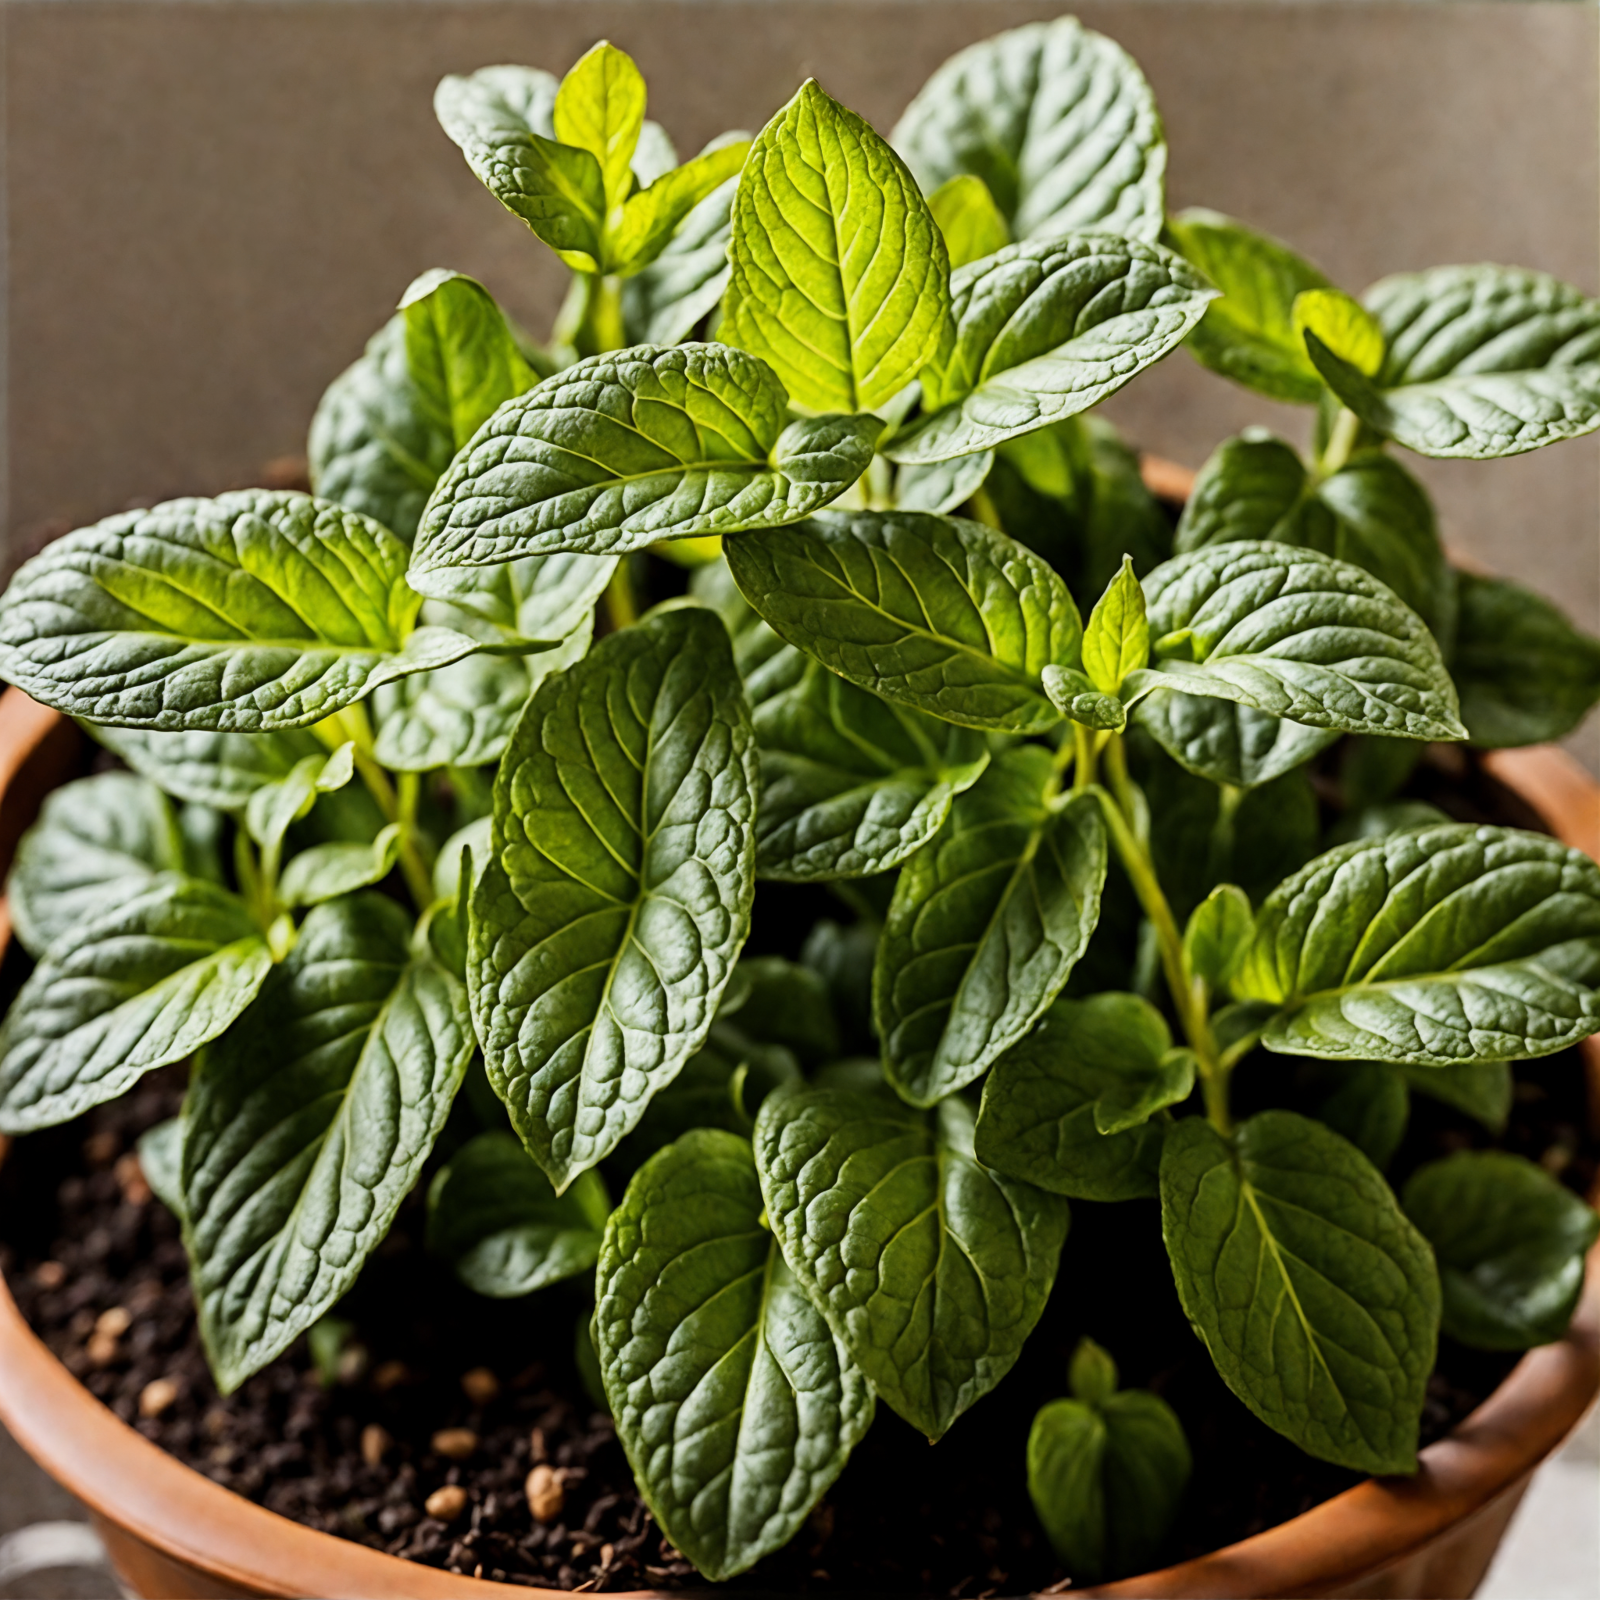 Hyper-realistic Mentha spicata (spearmint) in a bowl, with clear lighting against a dark background, indoor setting.